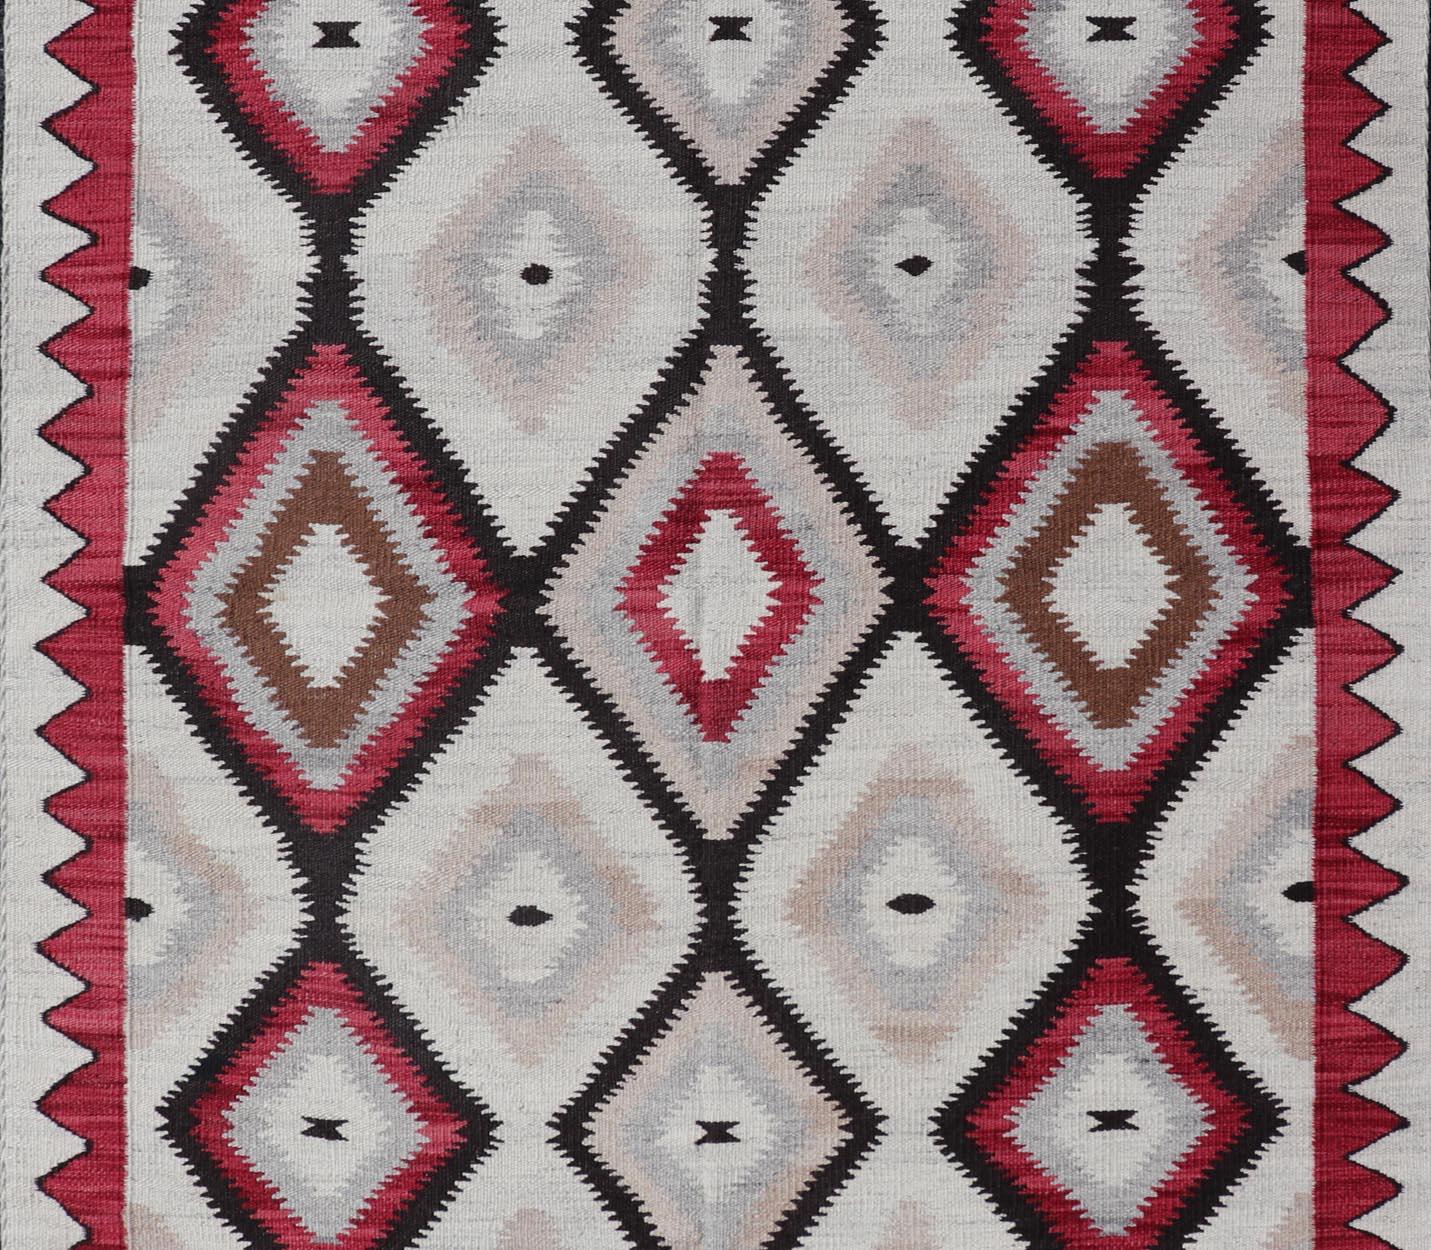 American Navajo Design Rug with Latticework Tribal Design in Red, Black and Gray For Sale 1